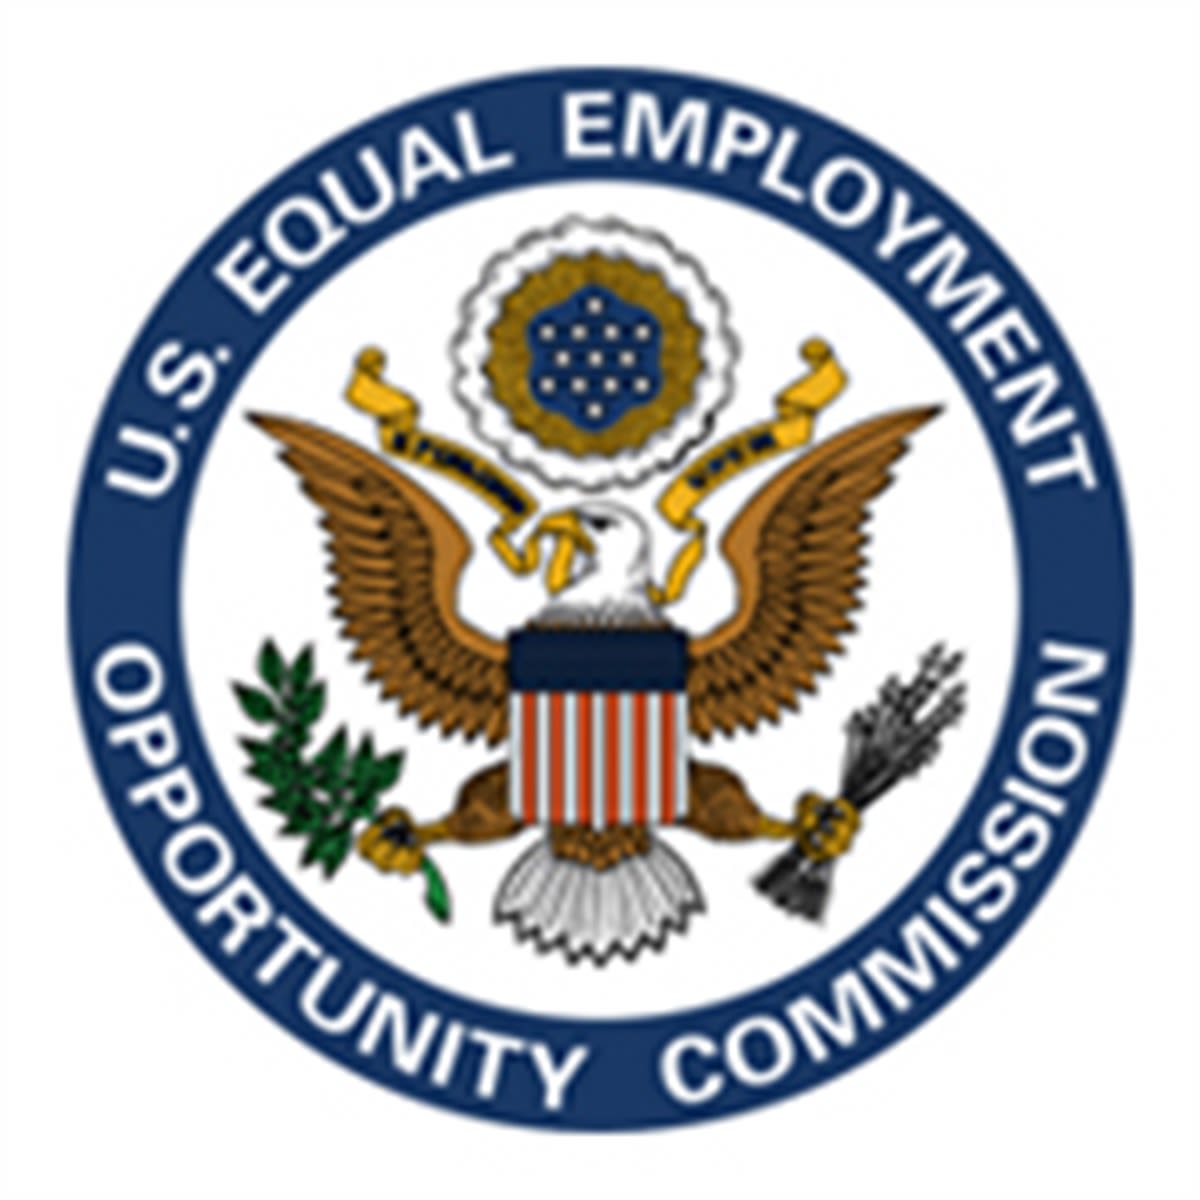 Erie Construction to Pay $99,000 to Settle EEOC Sex Discrimination and Retaliation Suit | JD Supra